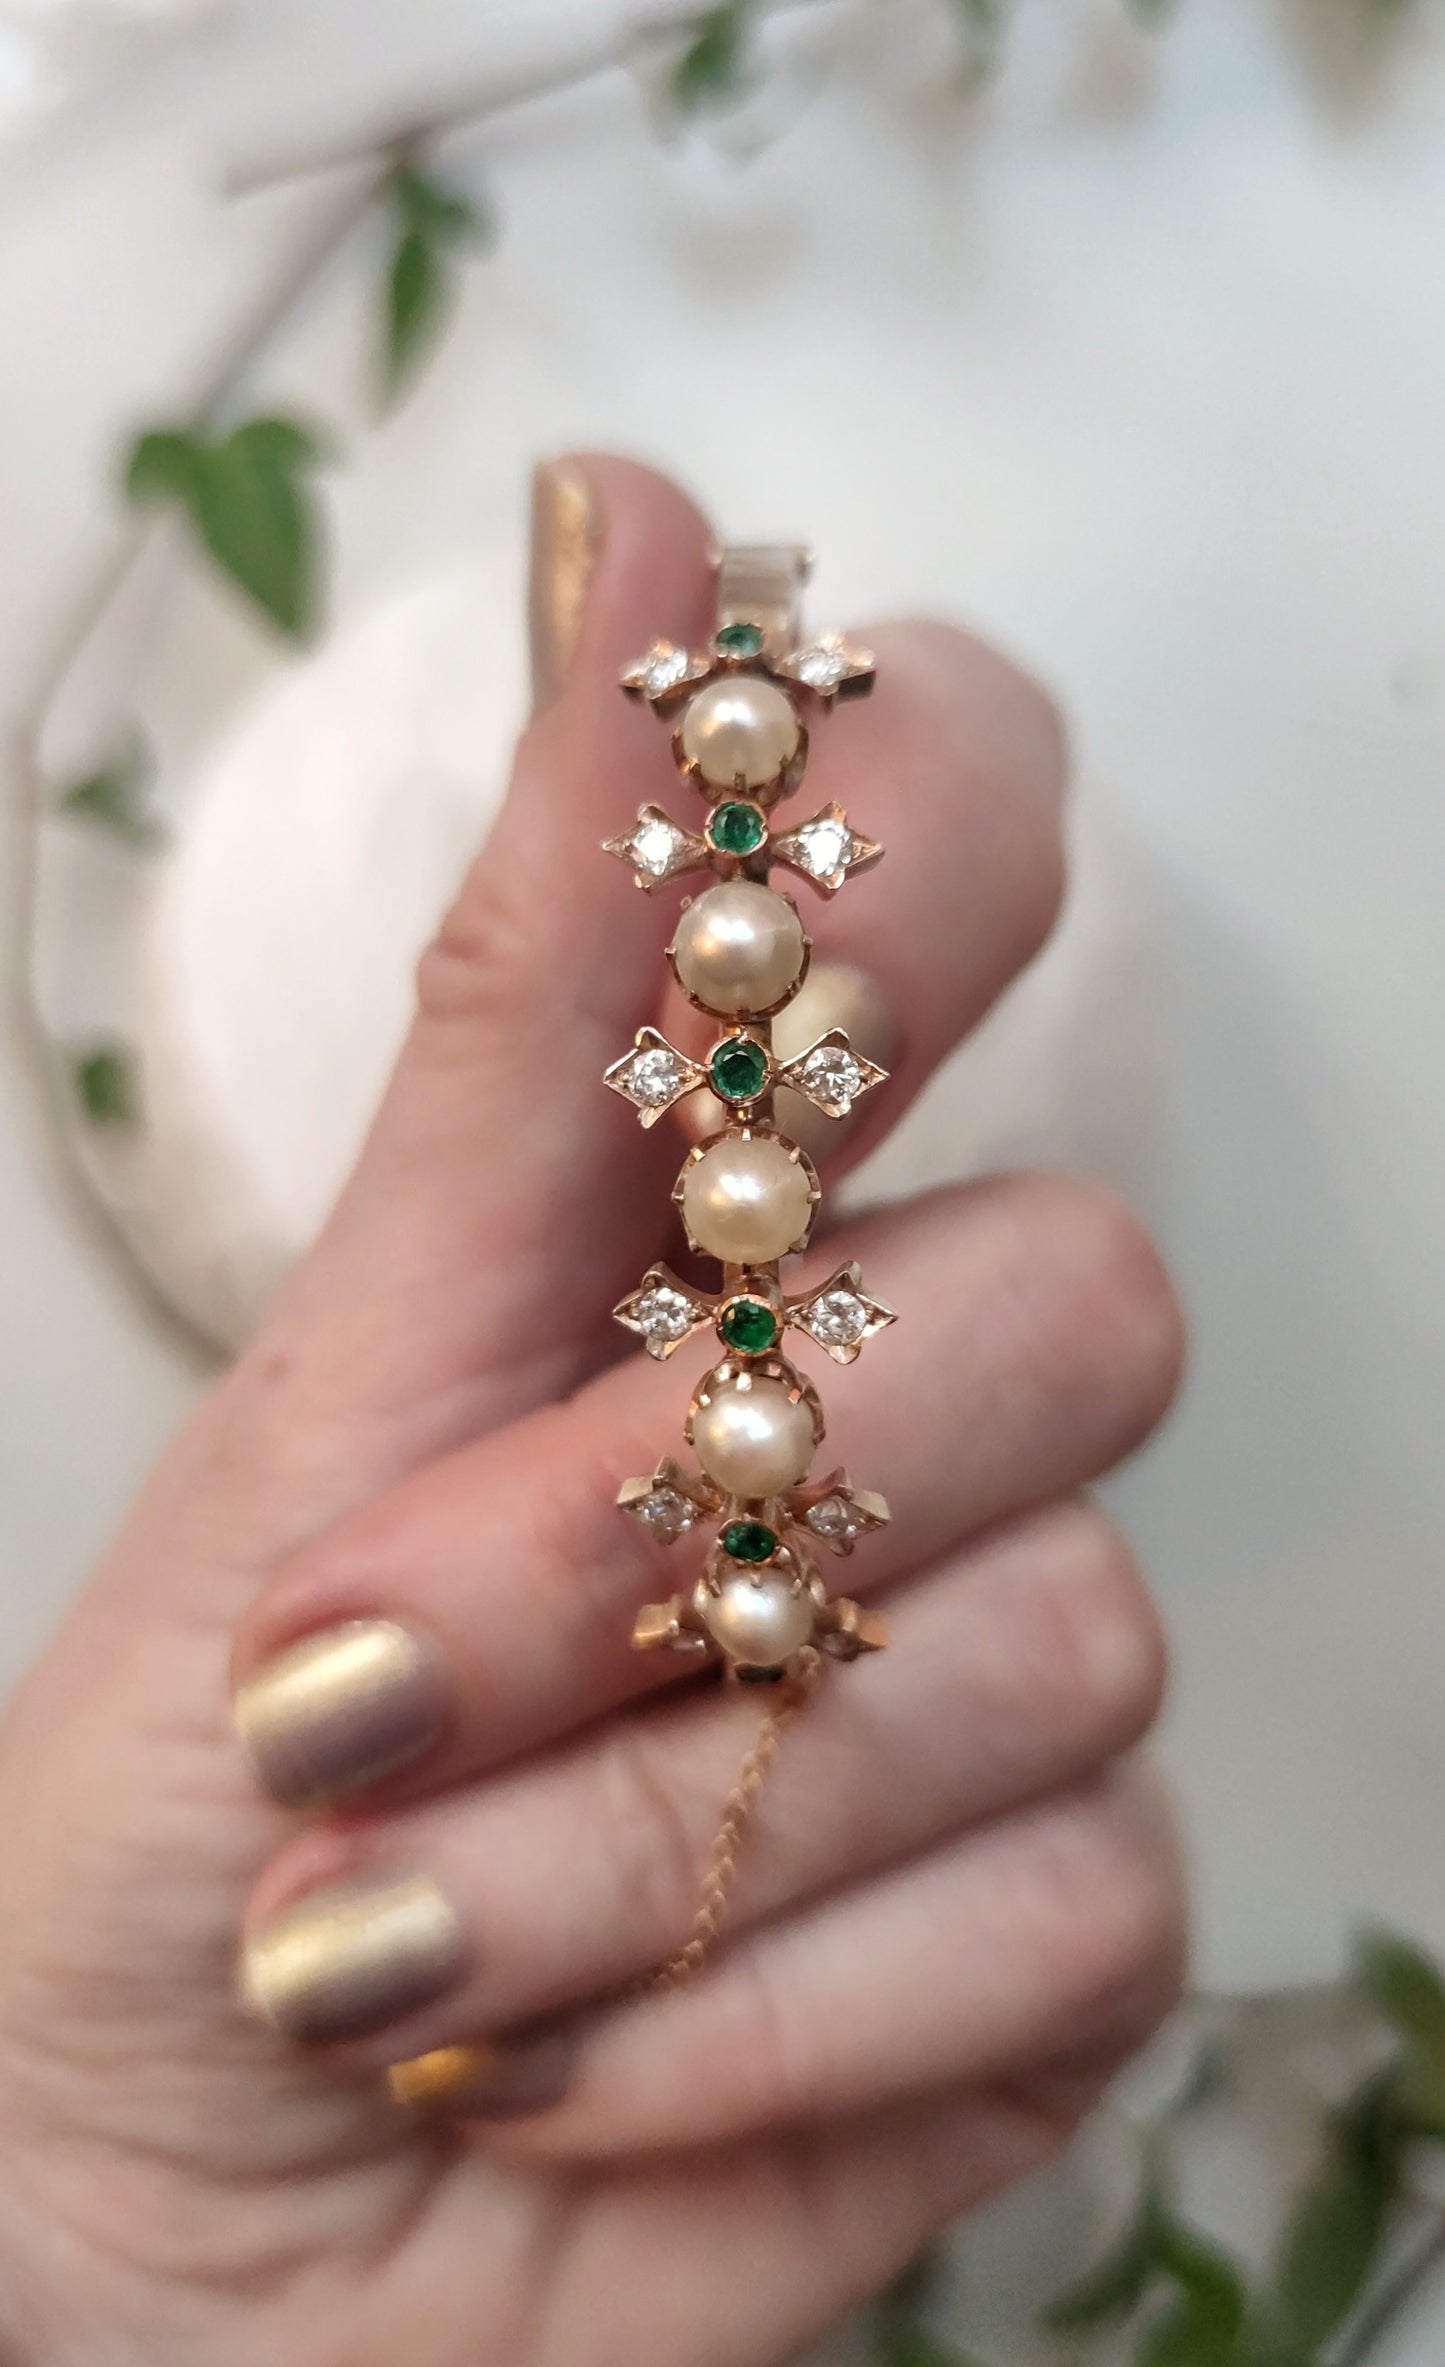 Princess cuff with diamonds, pearls and emeralds.